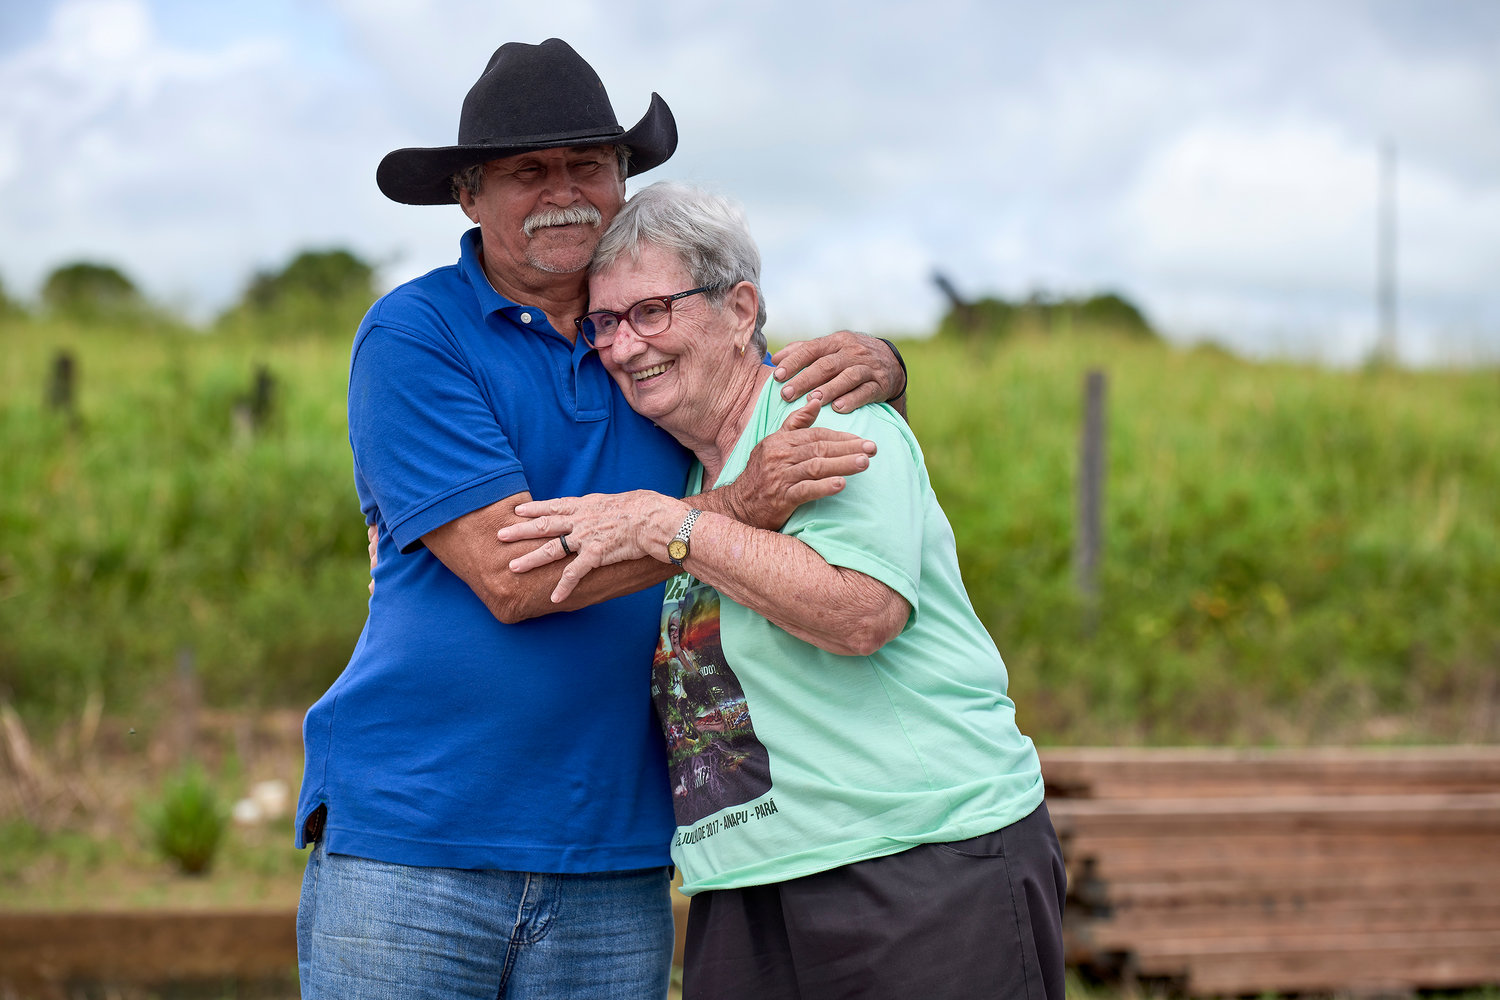 Sister Jane Dwyer, a U.S. member of the Sisters of Notre Dame de Namur, hugs a farmer after a meeting in the countryside near Anapu, in Brazil’s northern Para state.